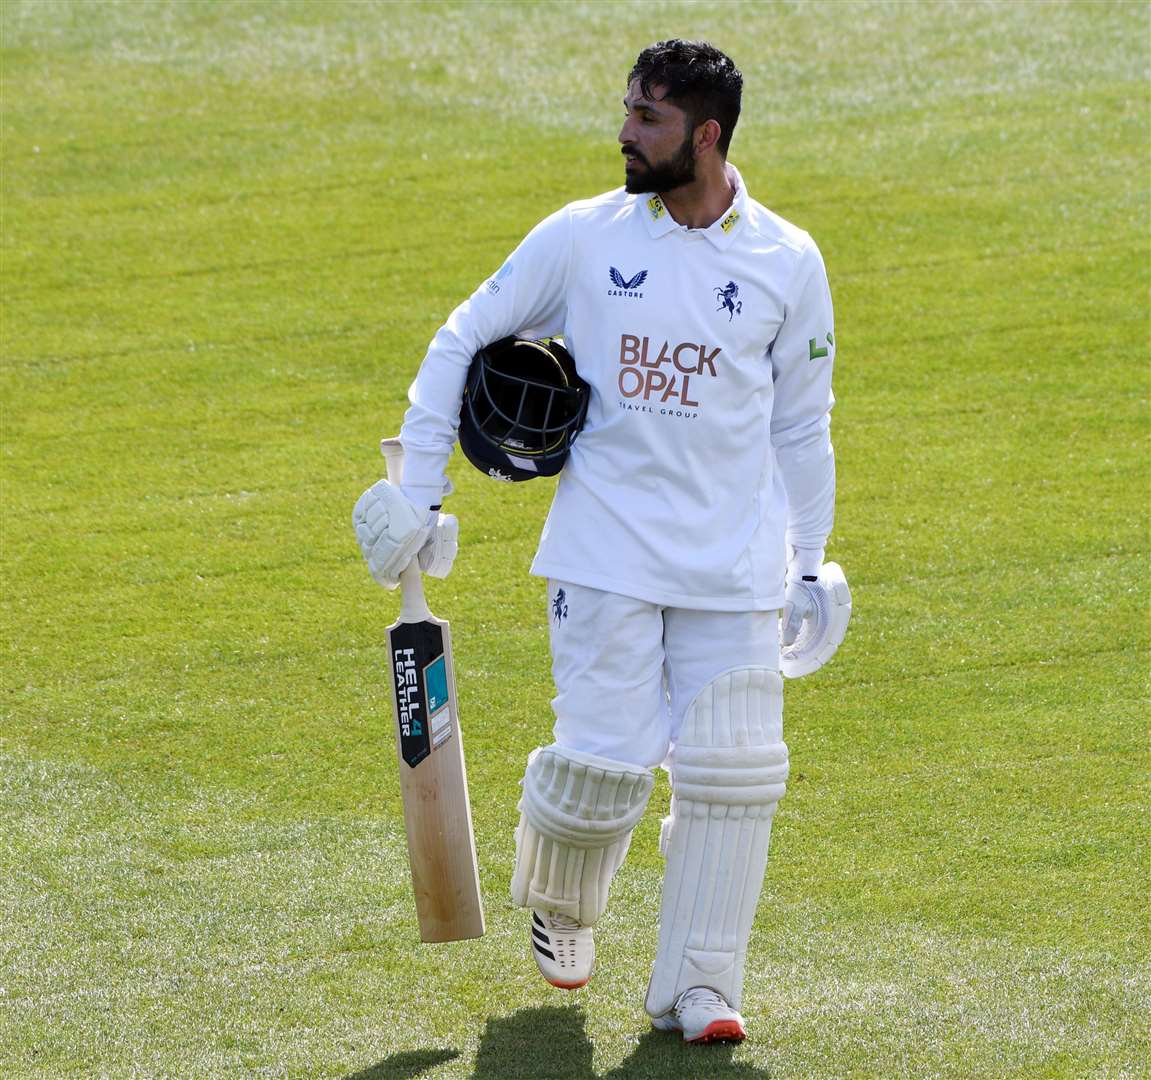 Hamidullah Qadri earned career-best figures with bat and ball against Lancashire. Picture: Barry Goodwin